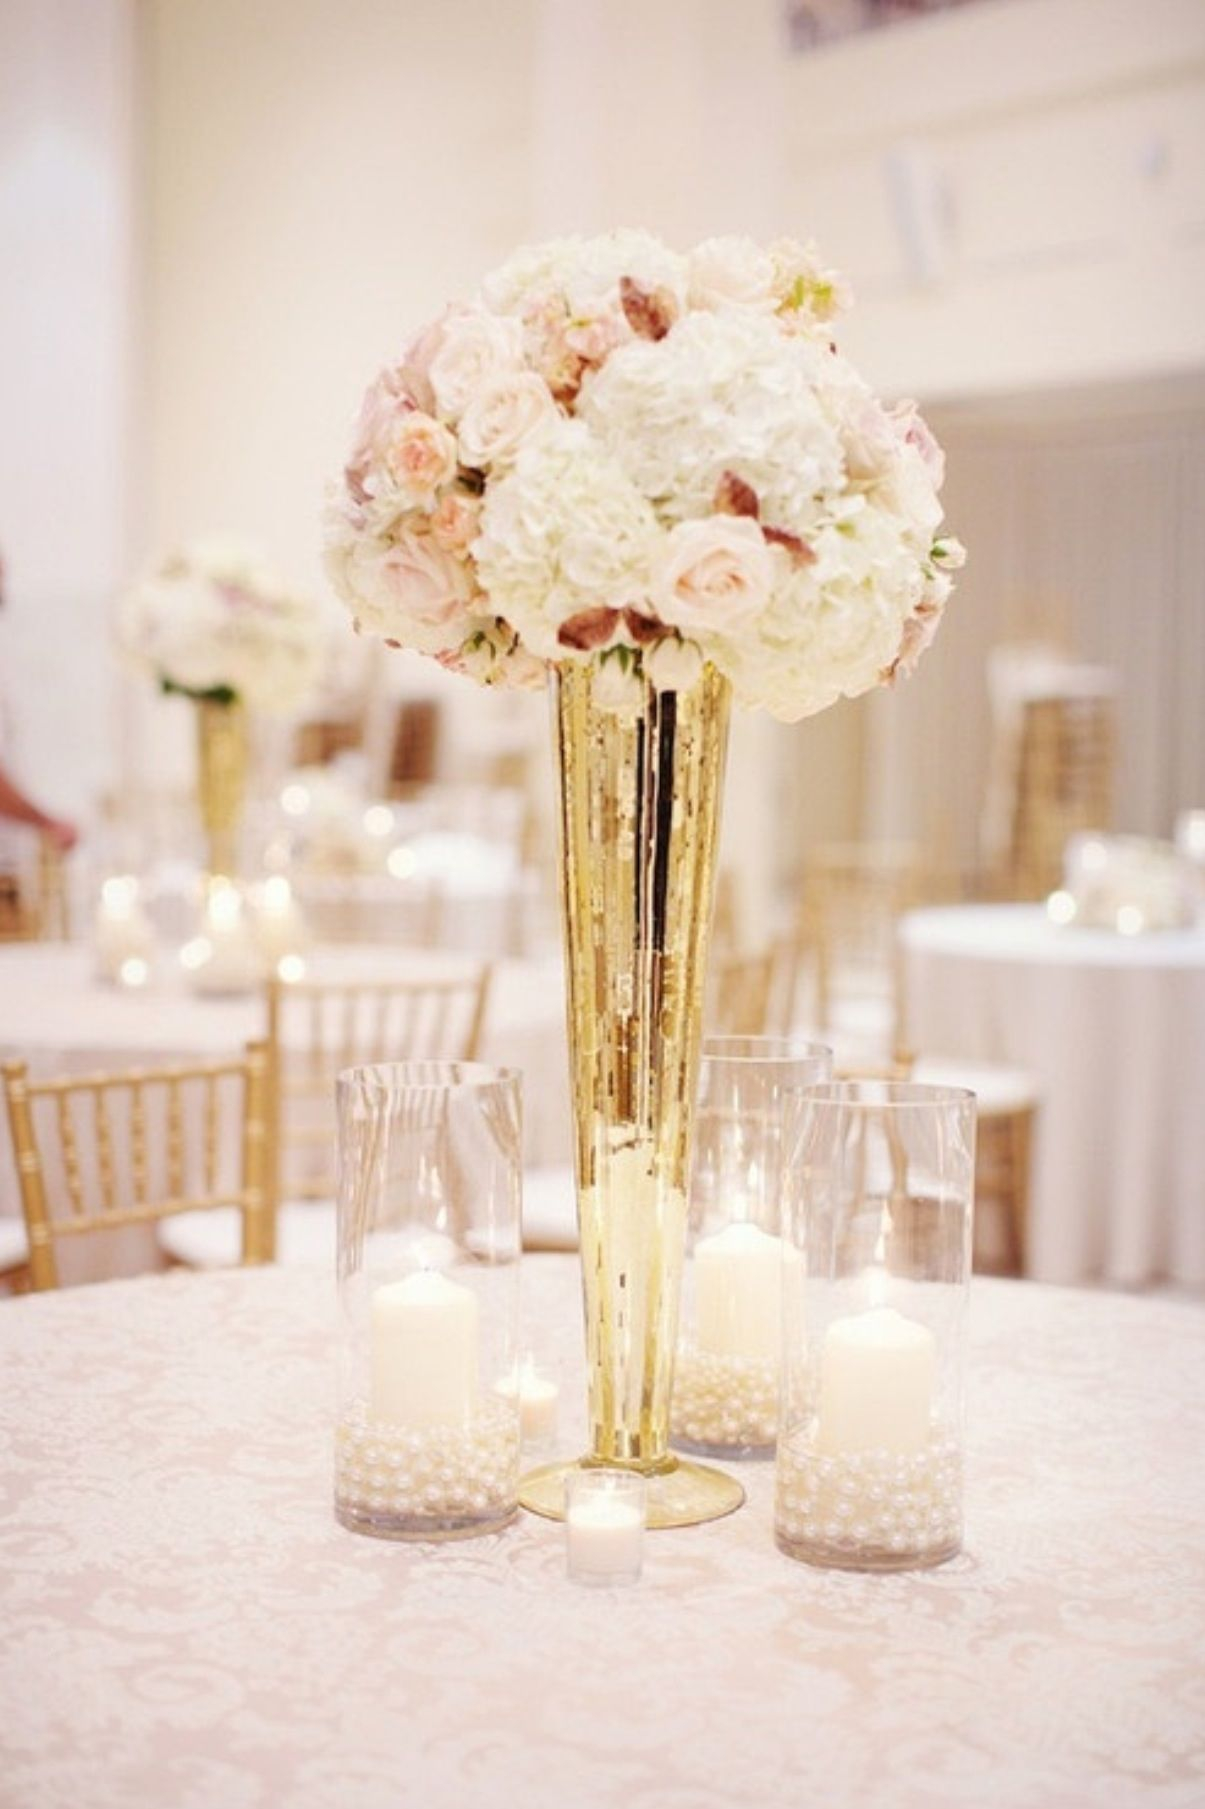 Tall Mercury Glass Centerpieces If Not Using Gold Table regarding dimensions 1205 X 1809